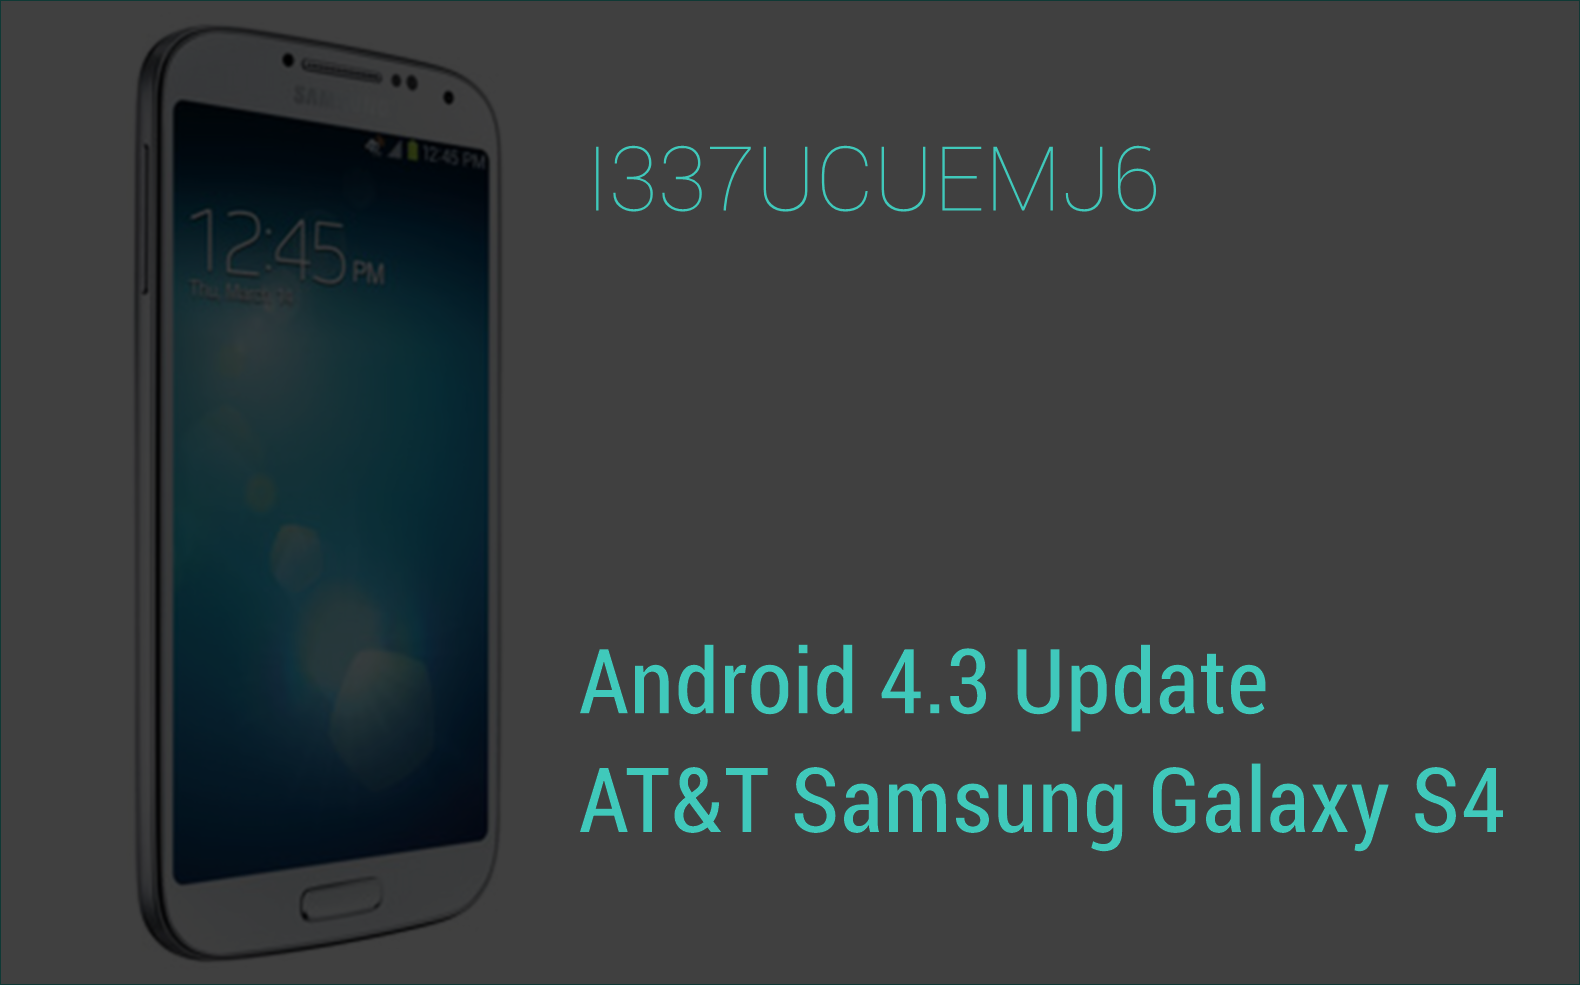 Android 4.3 Update for AT&T Galaxy S4 SGH-I337